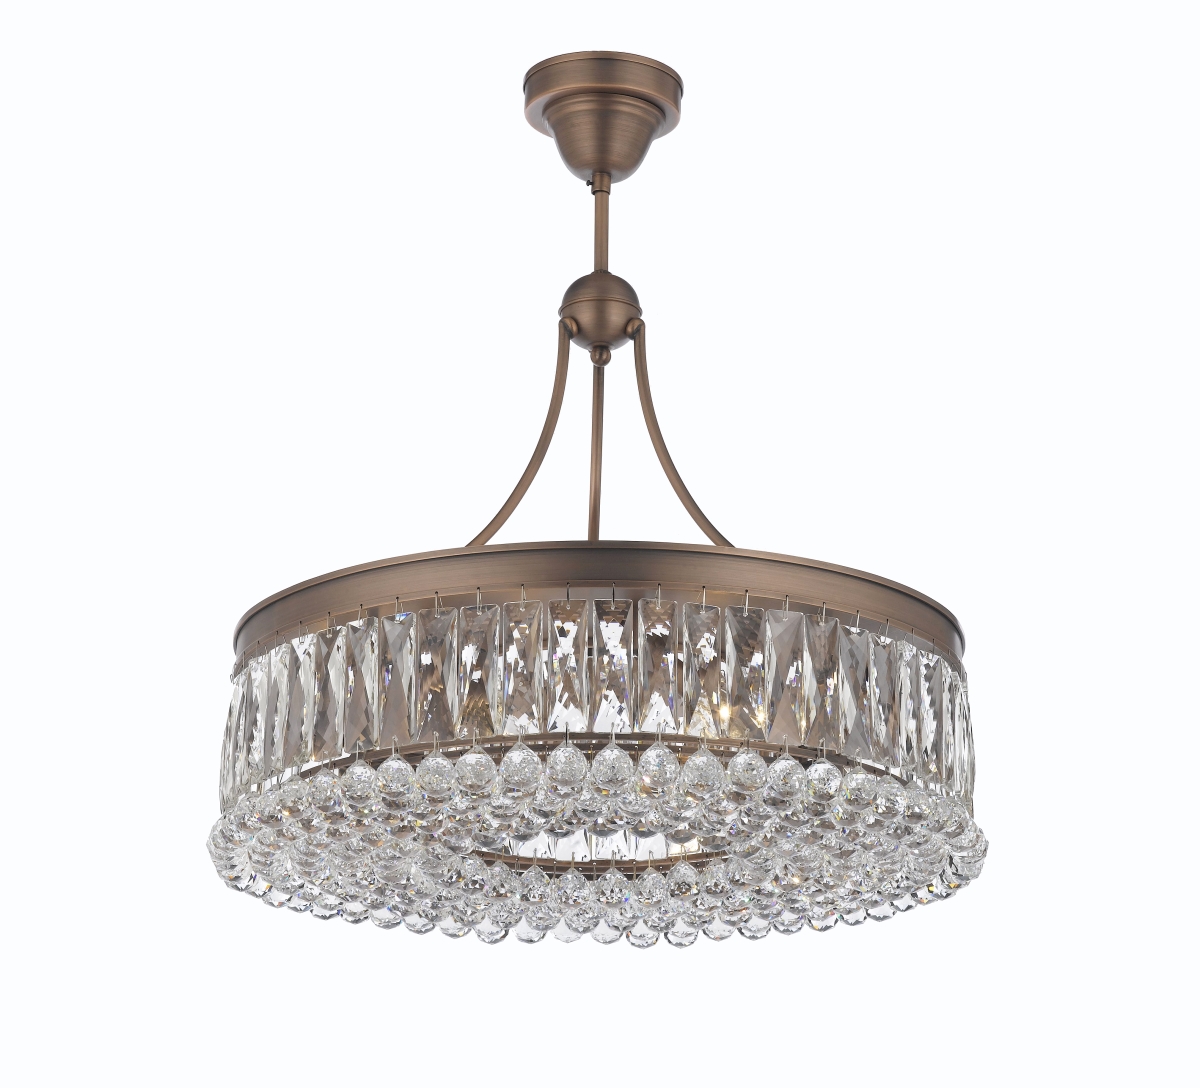 Pwg Lighting 2901-24-ac 24 In. Valencia Hanging Chandelier With Heirloom Grandcut Crystals - Antique Copper